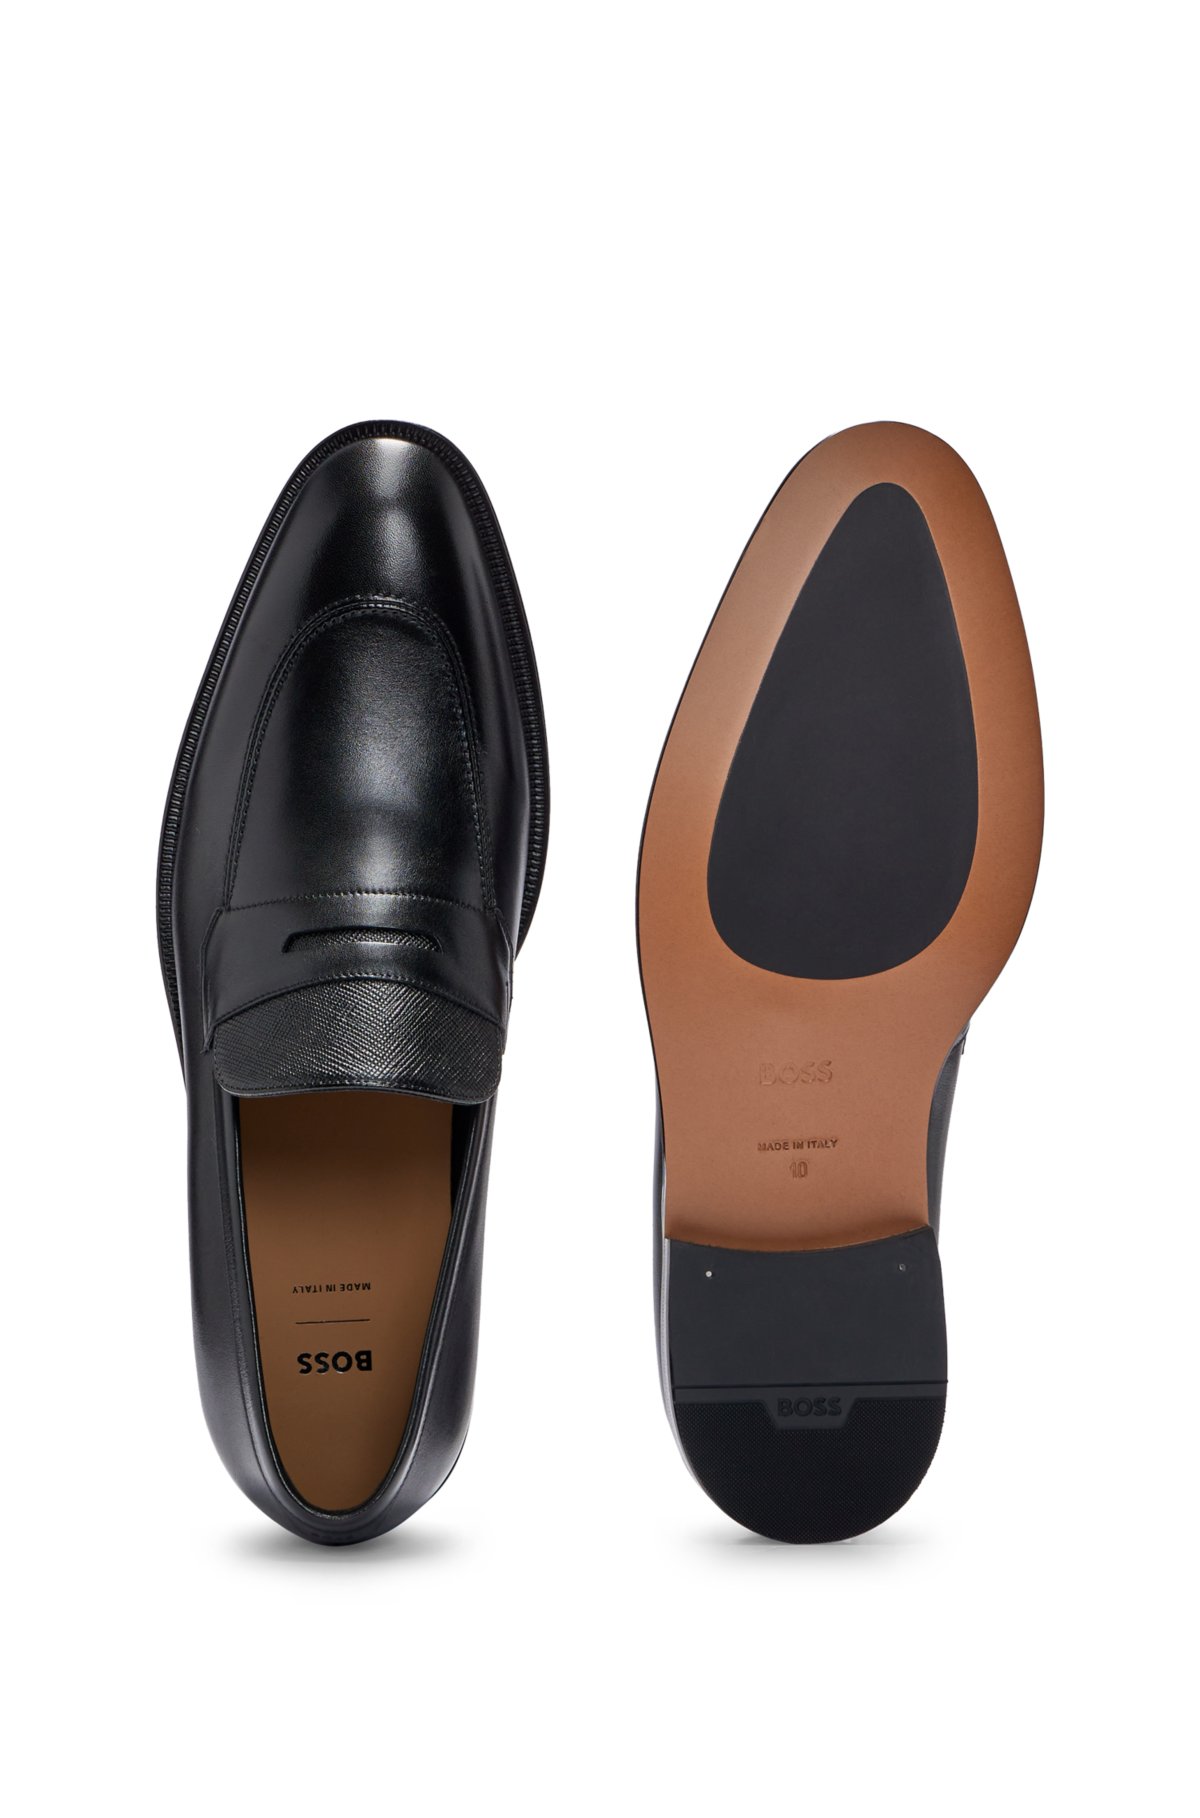 Loafers in plain and Saffiano-print leather, Black